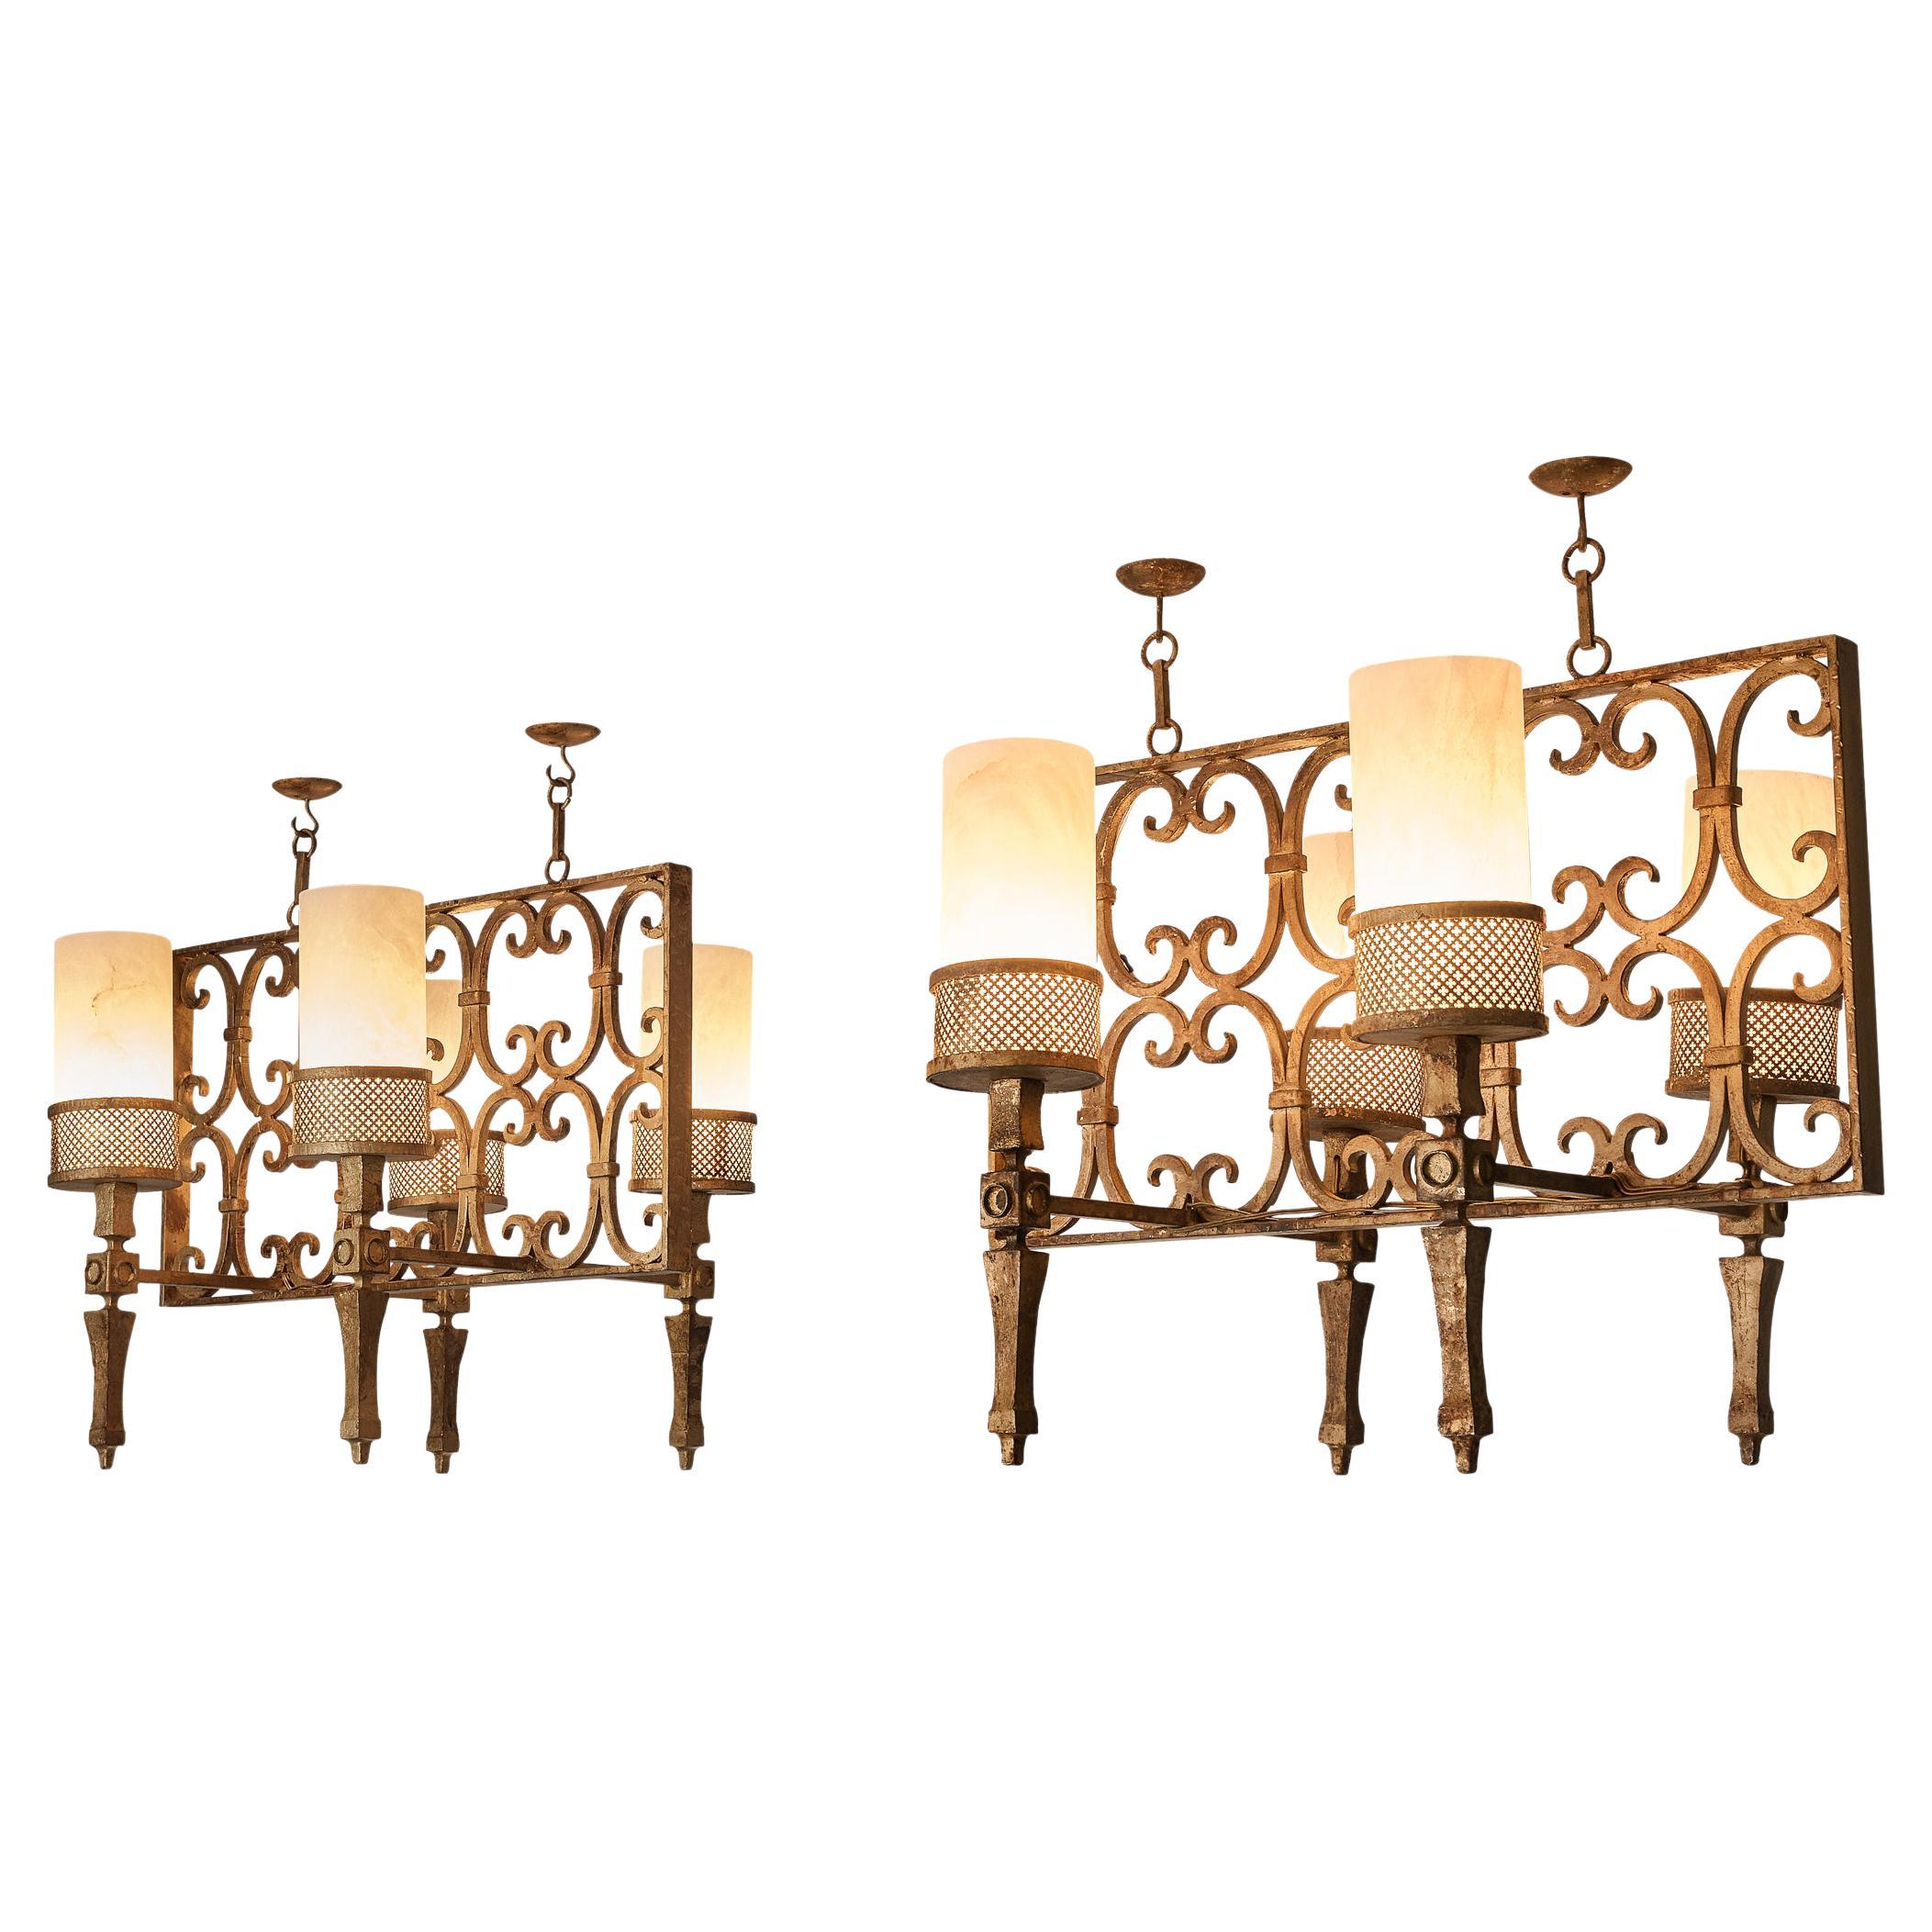 Spanish Chandeliers in Wrought Iron and Glass